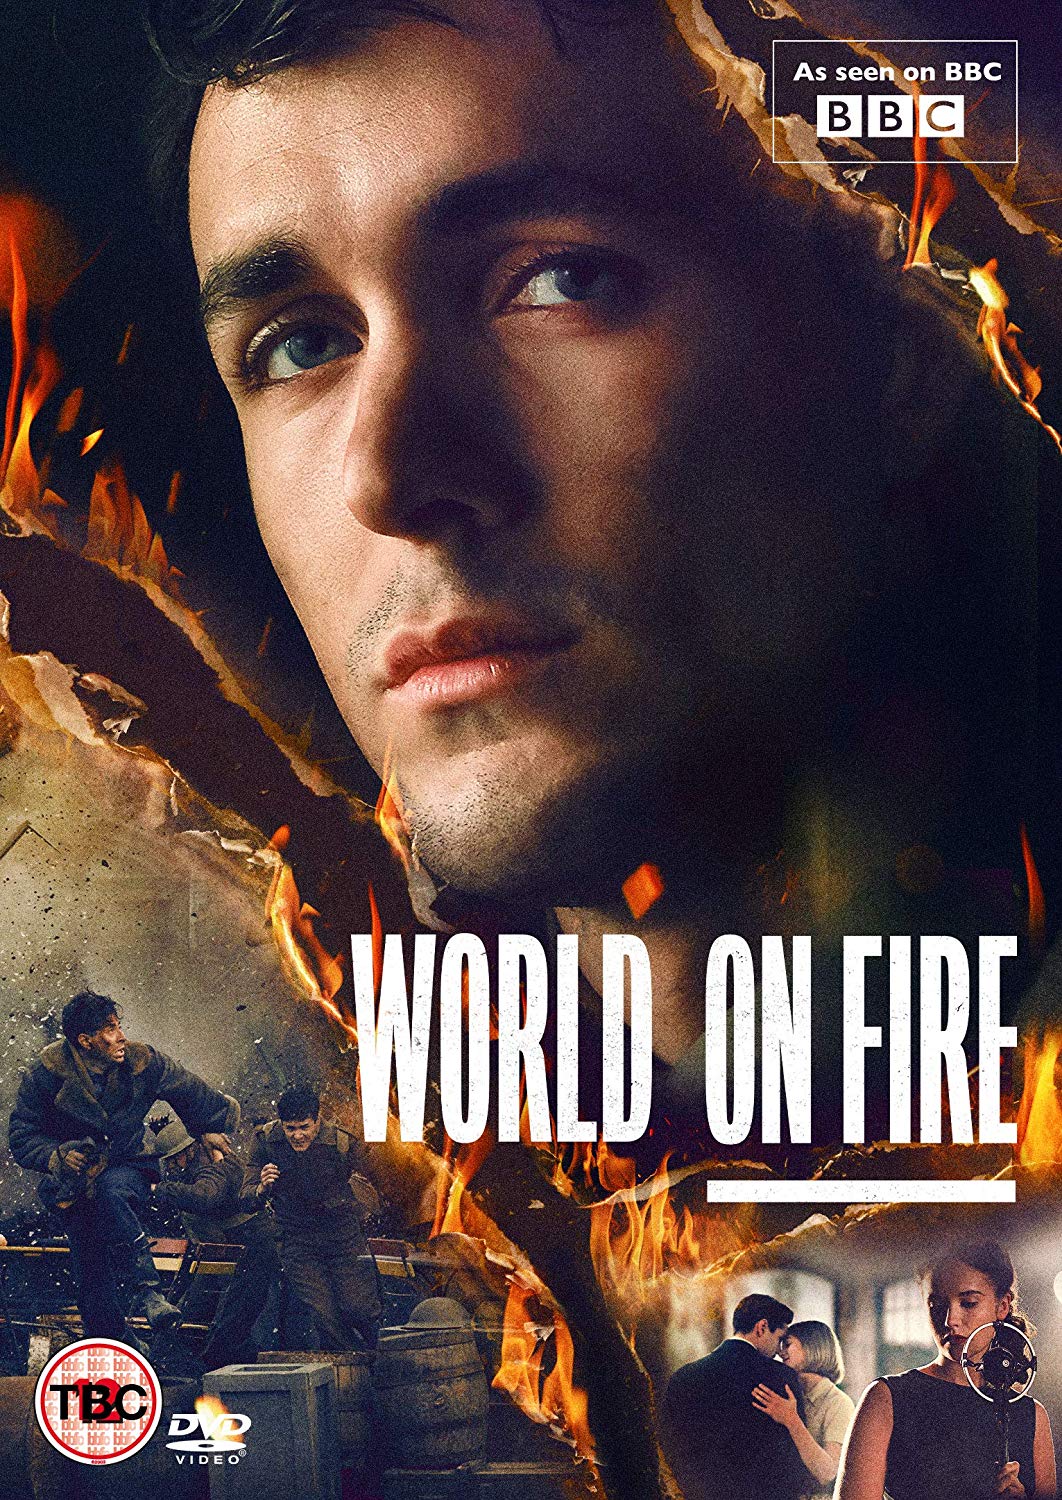 boom competitions - win World on Fire on DVD